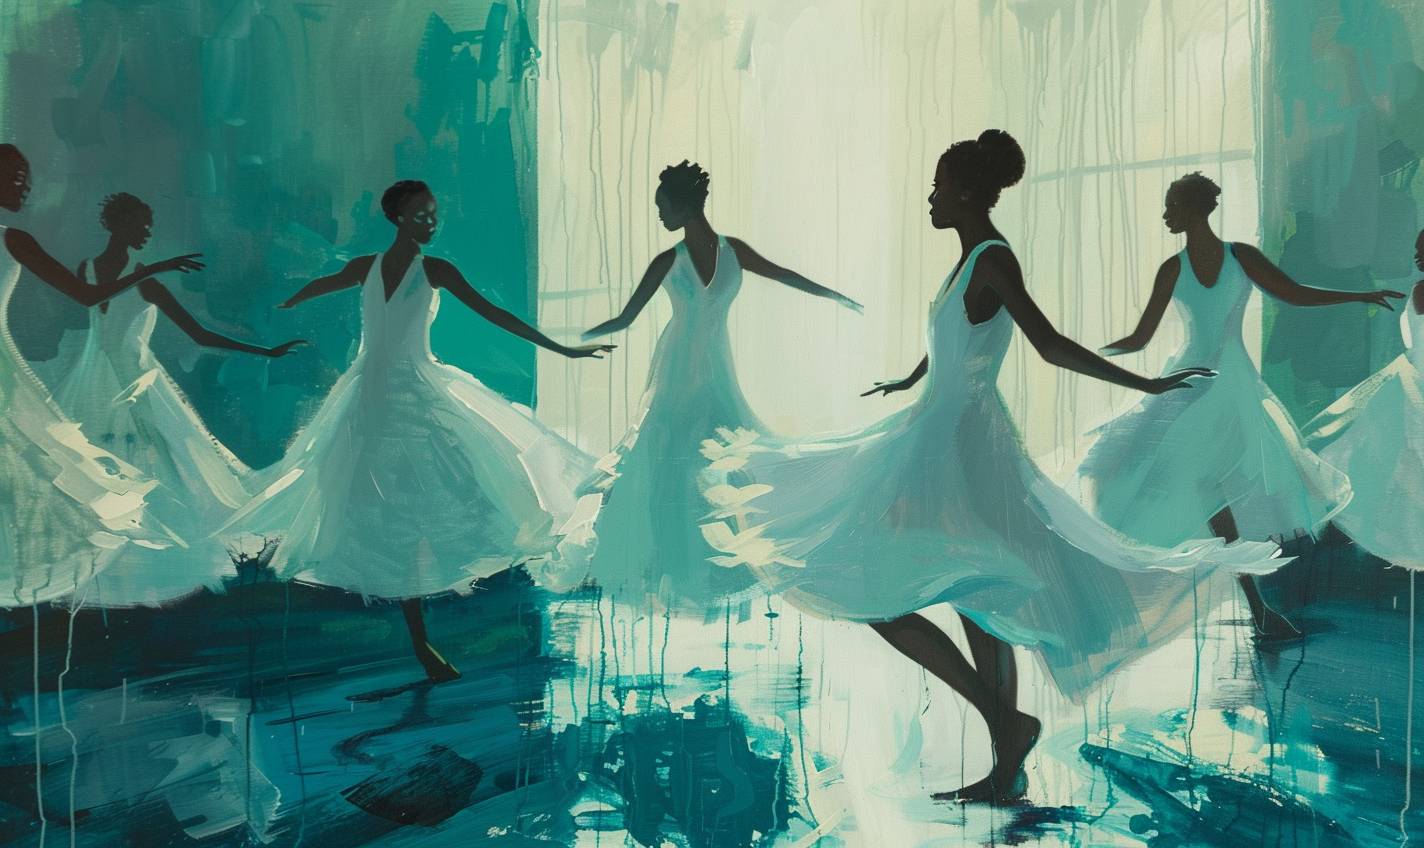 In style of Amy Sherald, Ethereal ballroom with phantom dancers